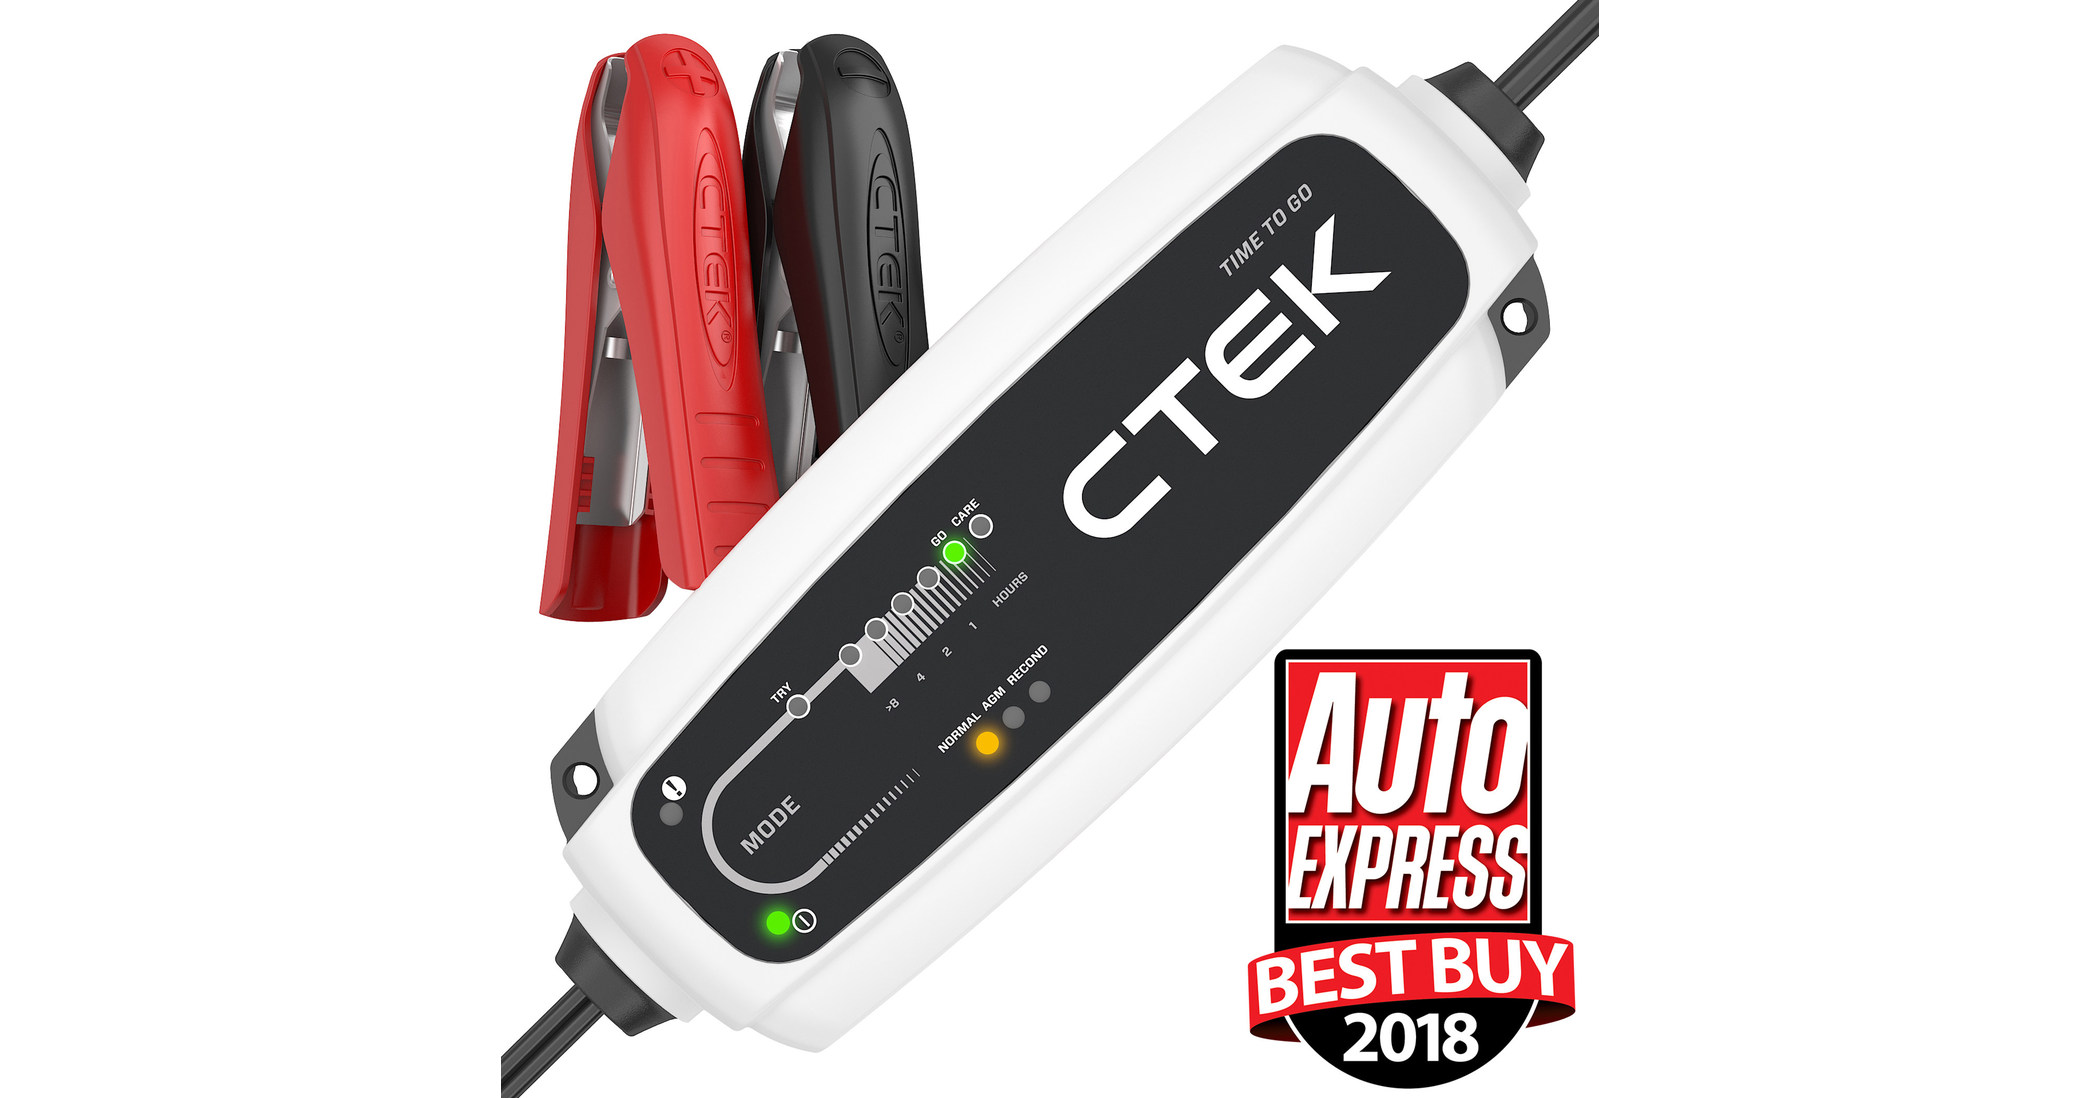 CTEK Crowned The Winner In Best Battery Charger Test